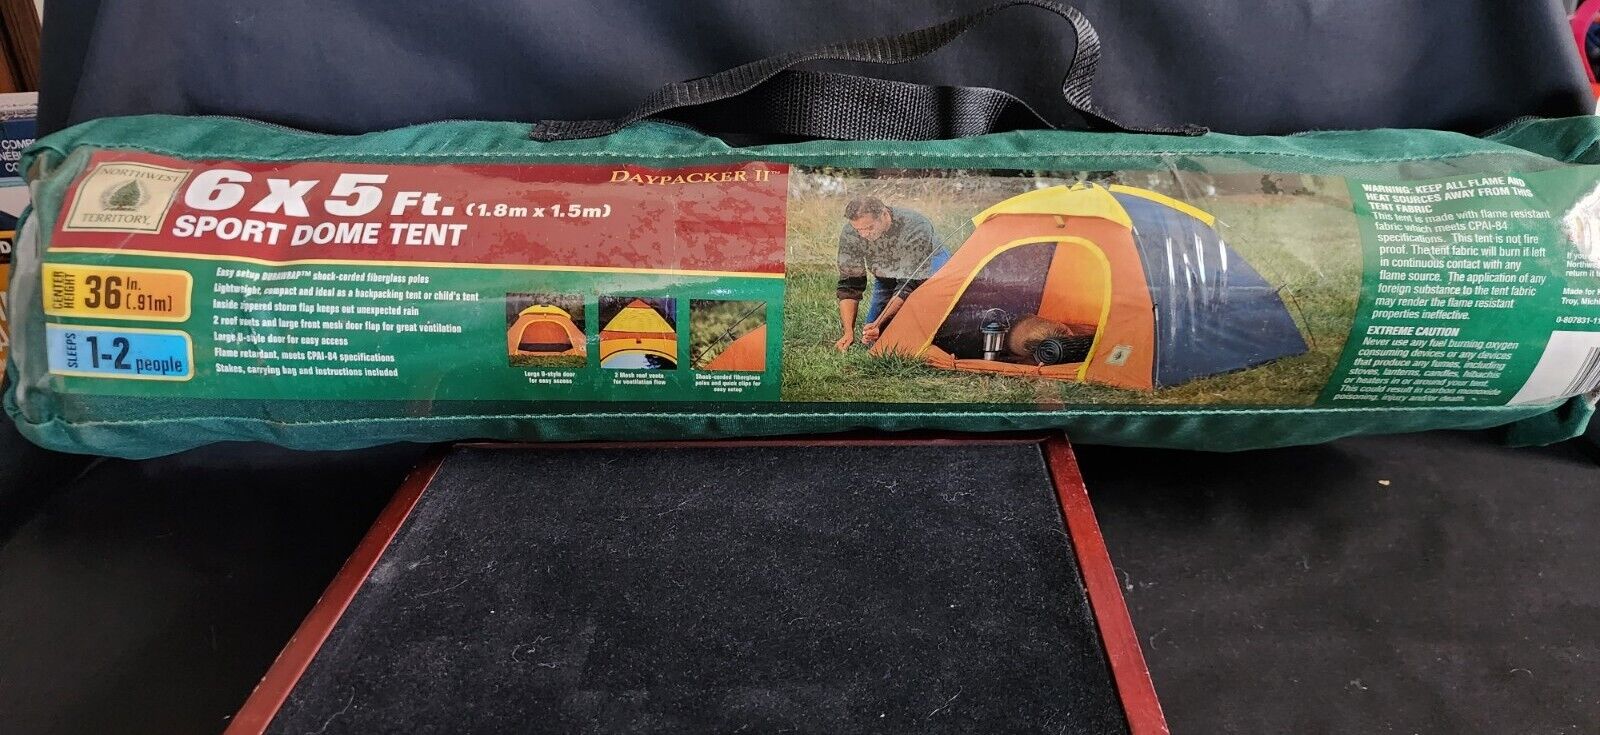 Northwest Territory 6 x 5 Sport Dome Tent (Day Packer 2) Sleeps 1-2 People